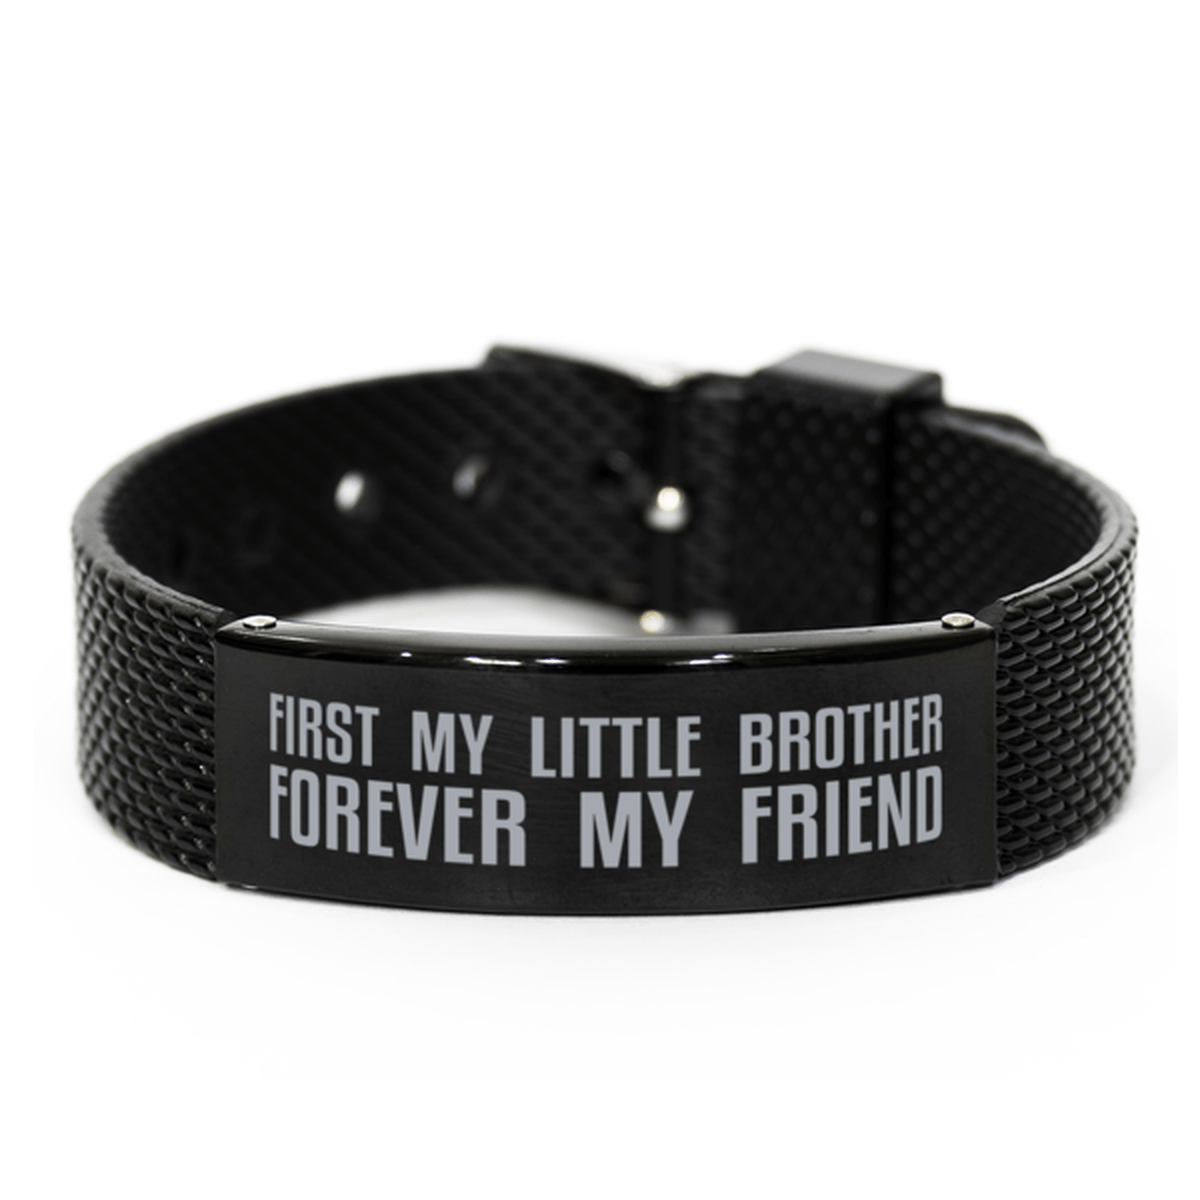 Unique Little Brother Black Shark Mesh Bracelet, First My Little Brother Forever My Friend, Best Gift for Little Brother Birthday, Christmas